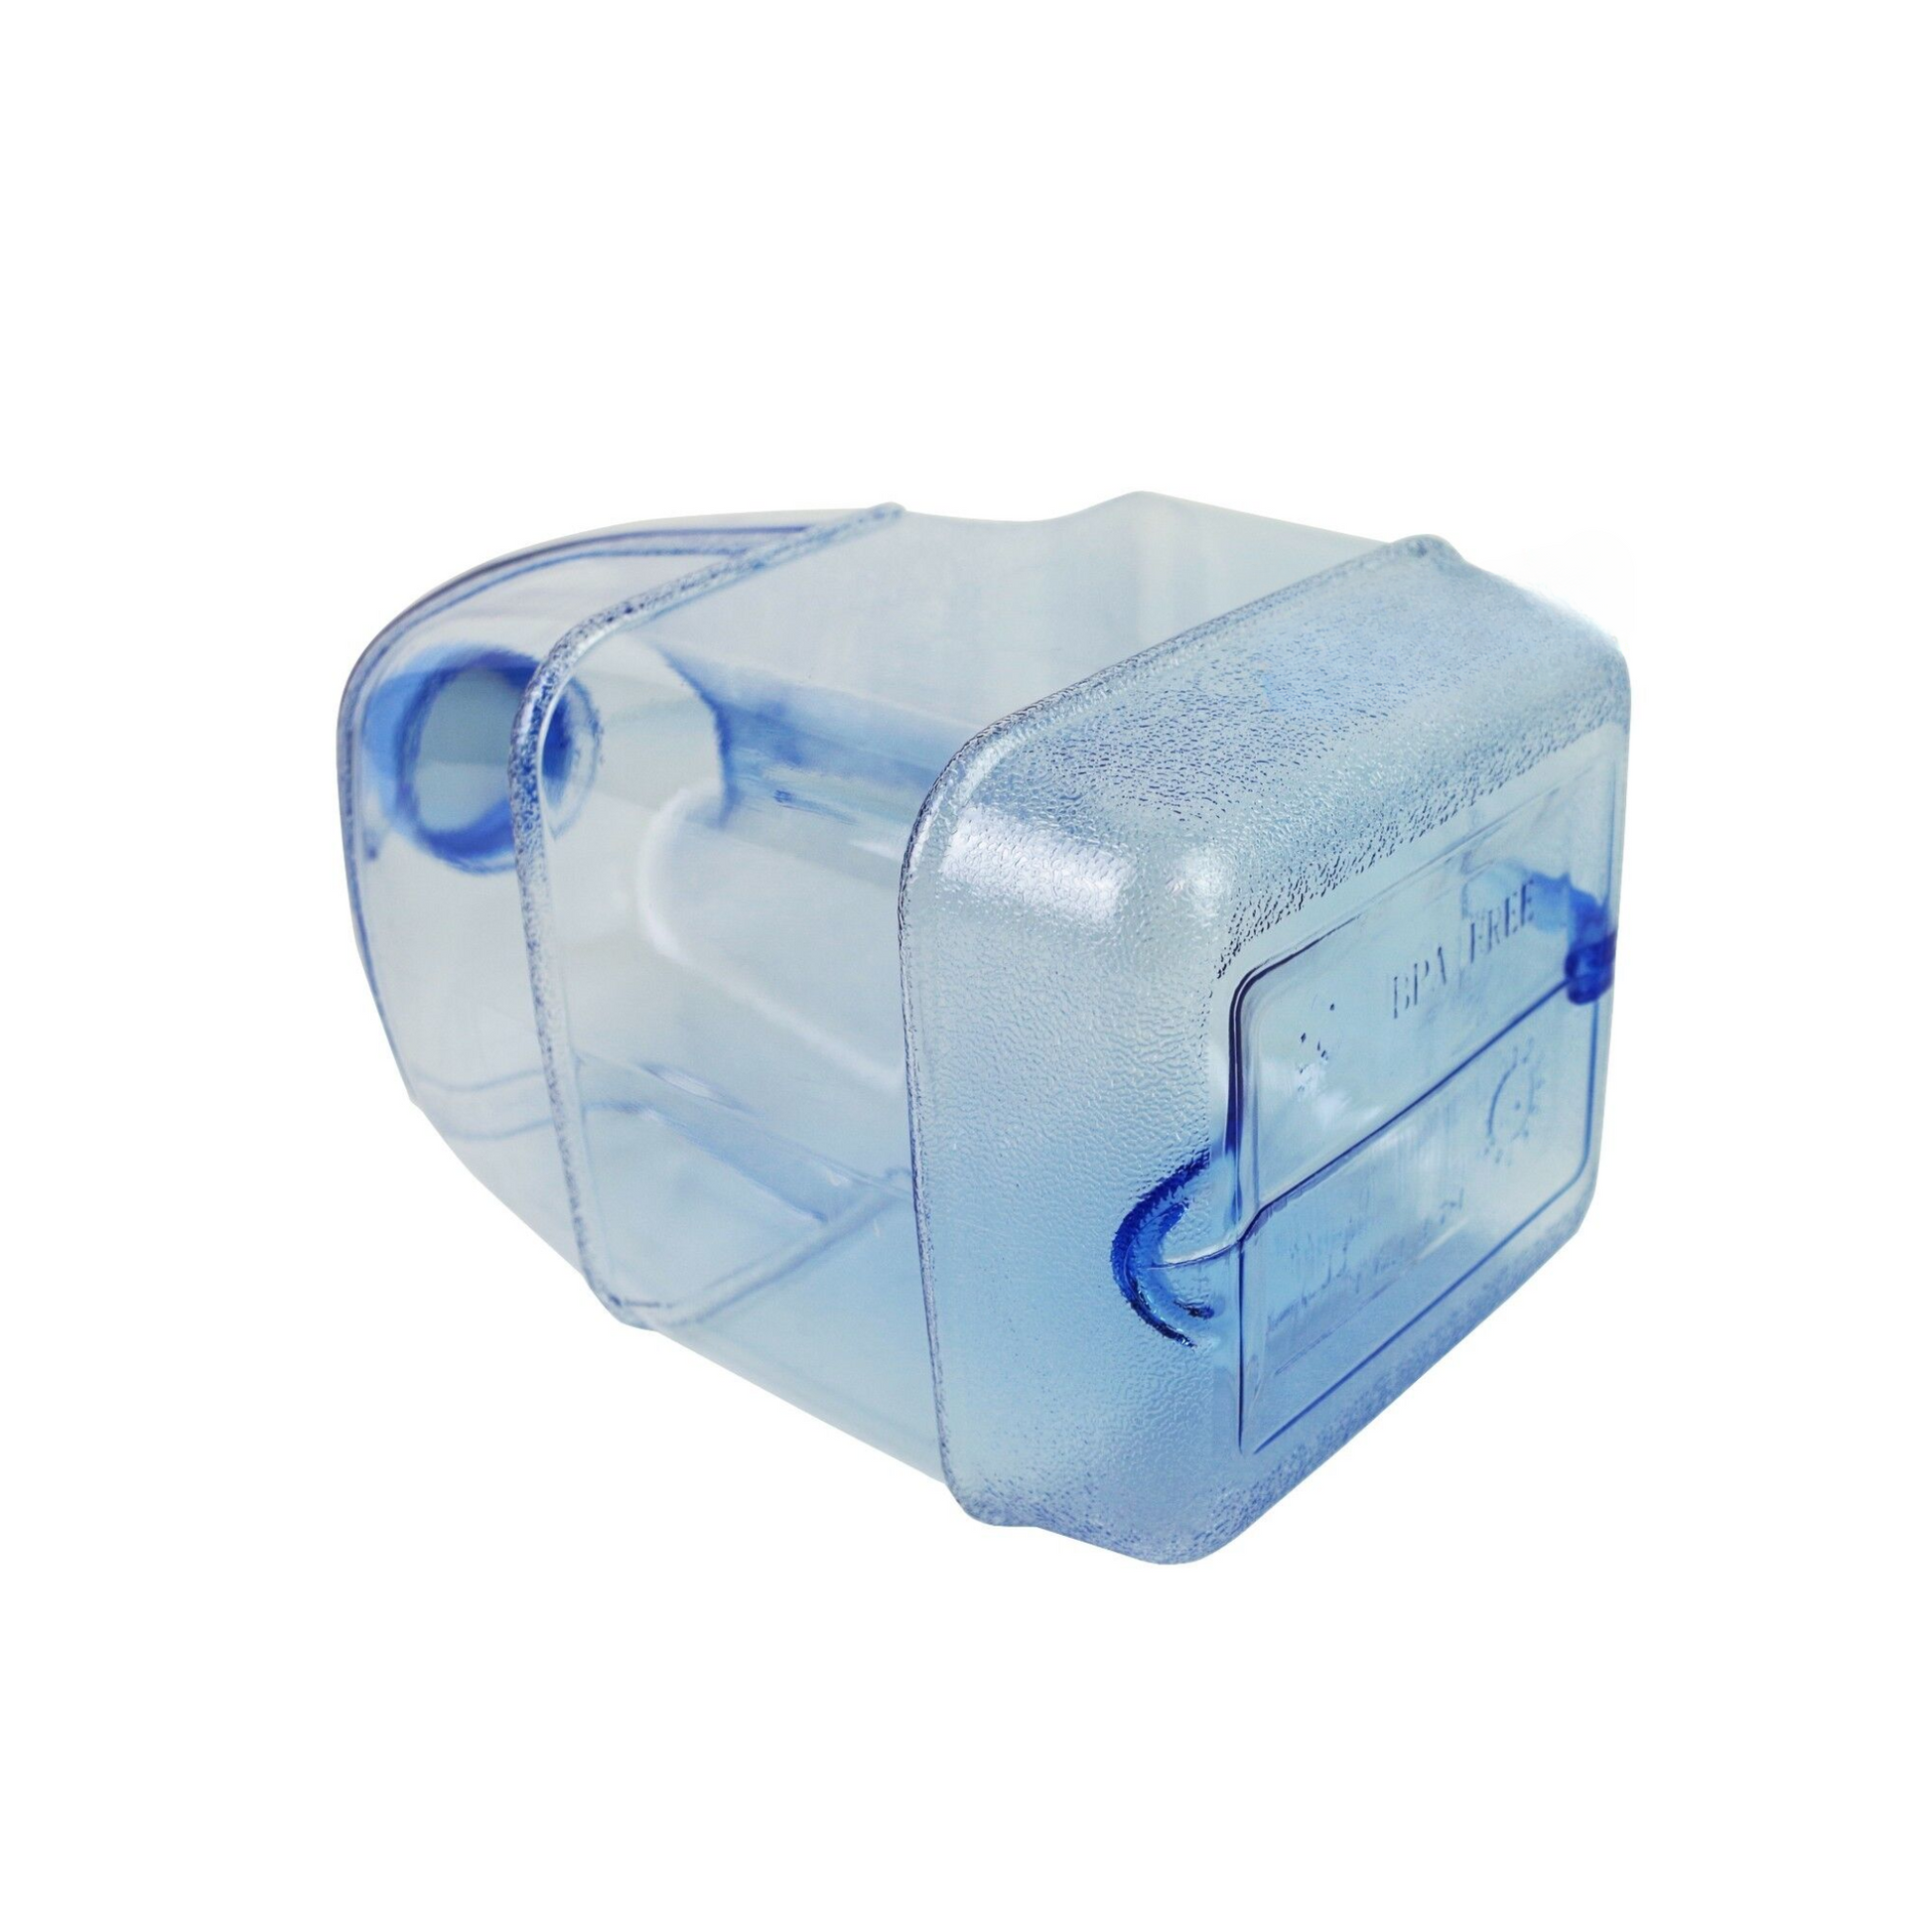 1-gallon clear blue plastic jug for water storage and dispensing, featuring a convenient handle for easy pouring